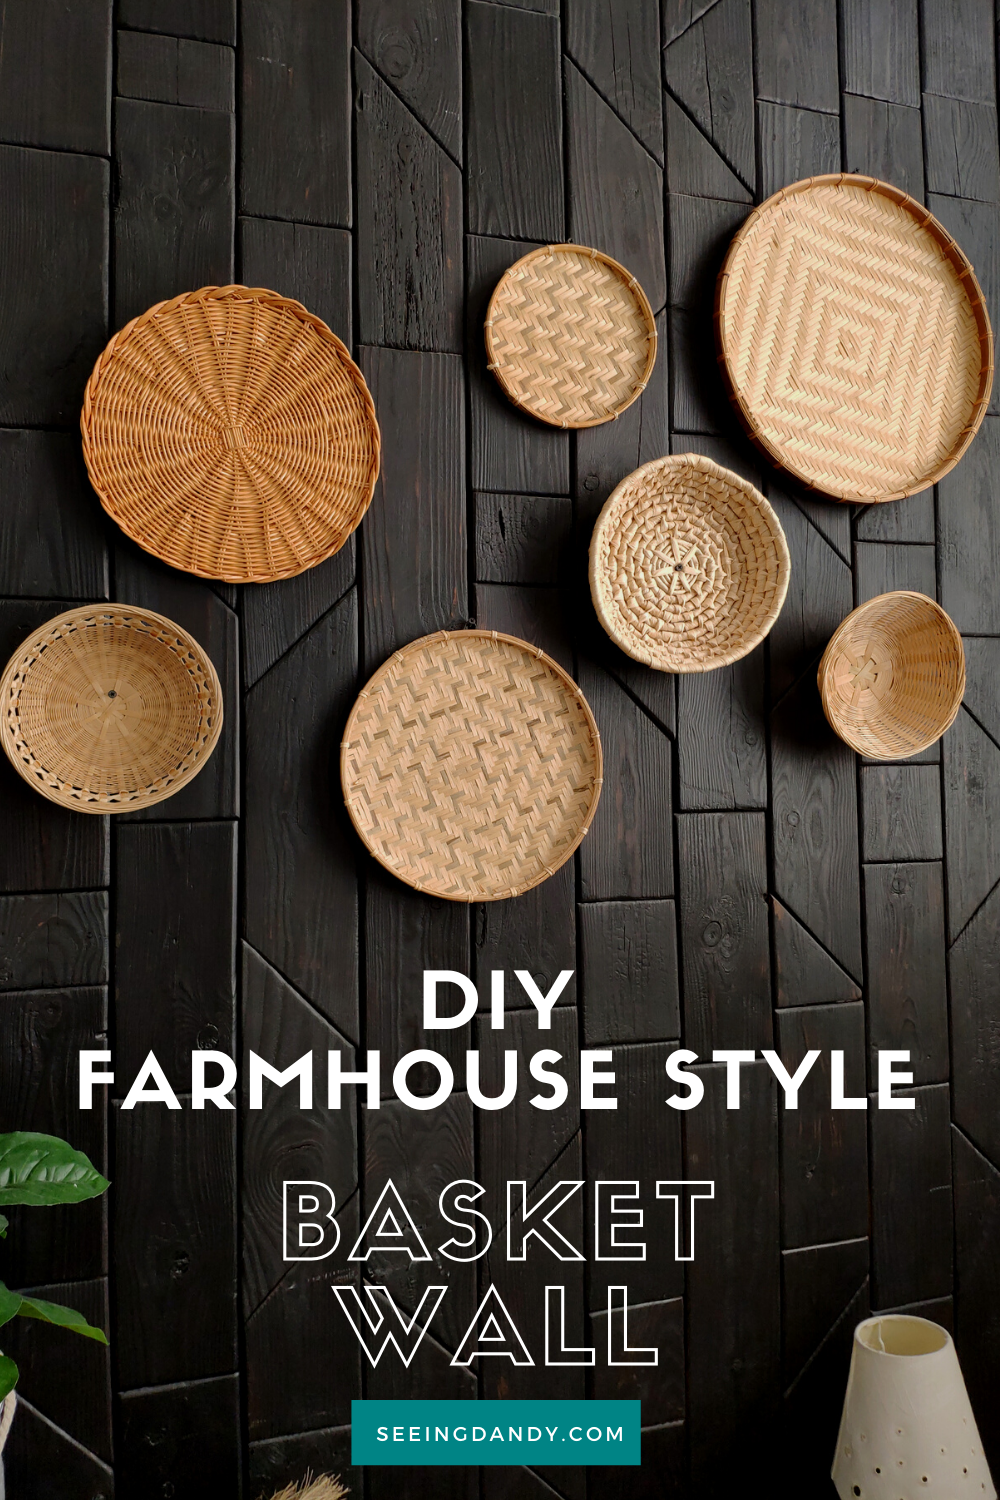 farmhouse style basket wall, diy ideas, for the home, home decor, decorating, decorative wall, fruit baskets, decorative baskets, woven baskets